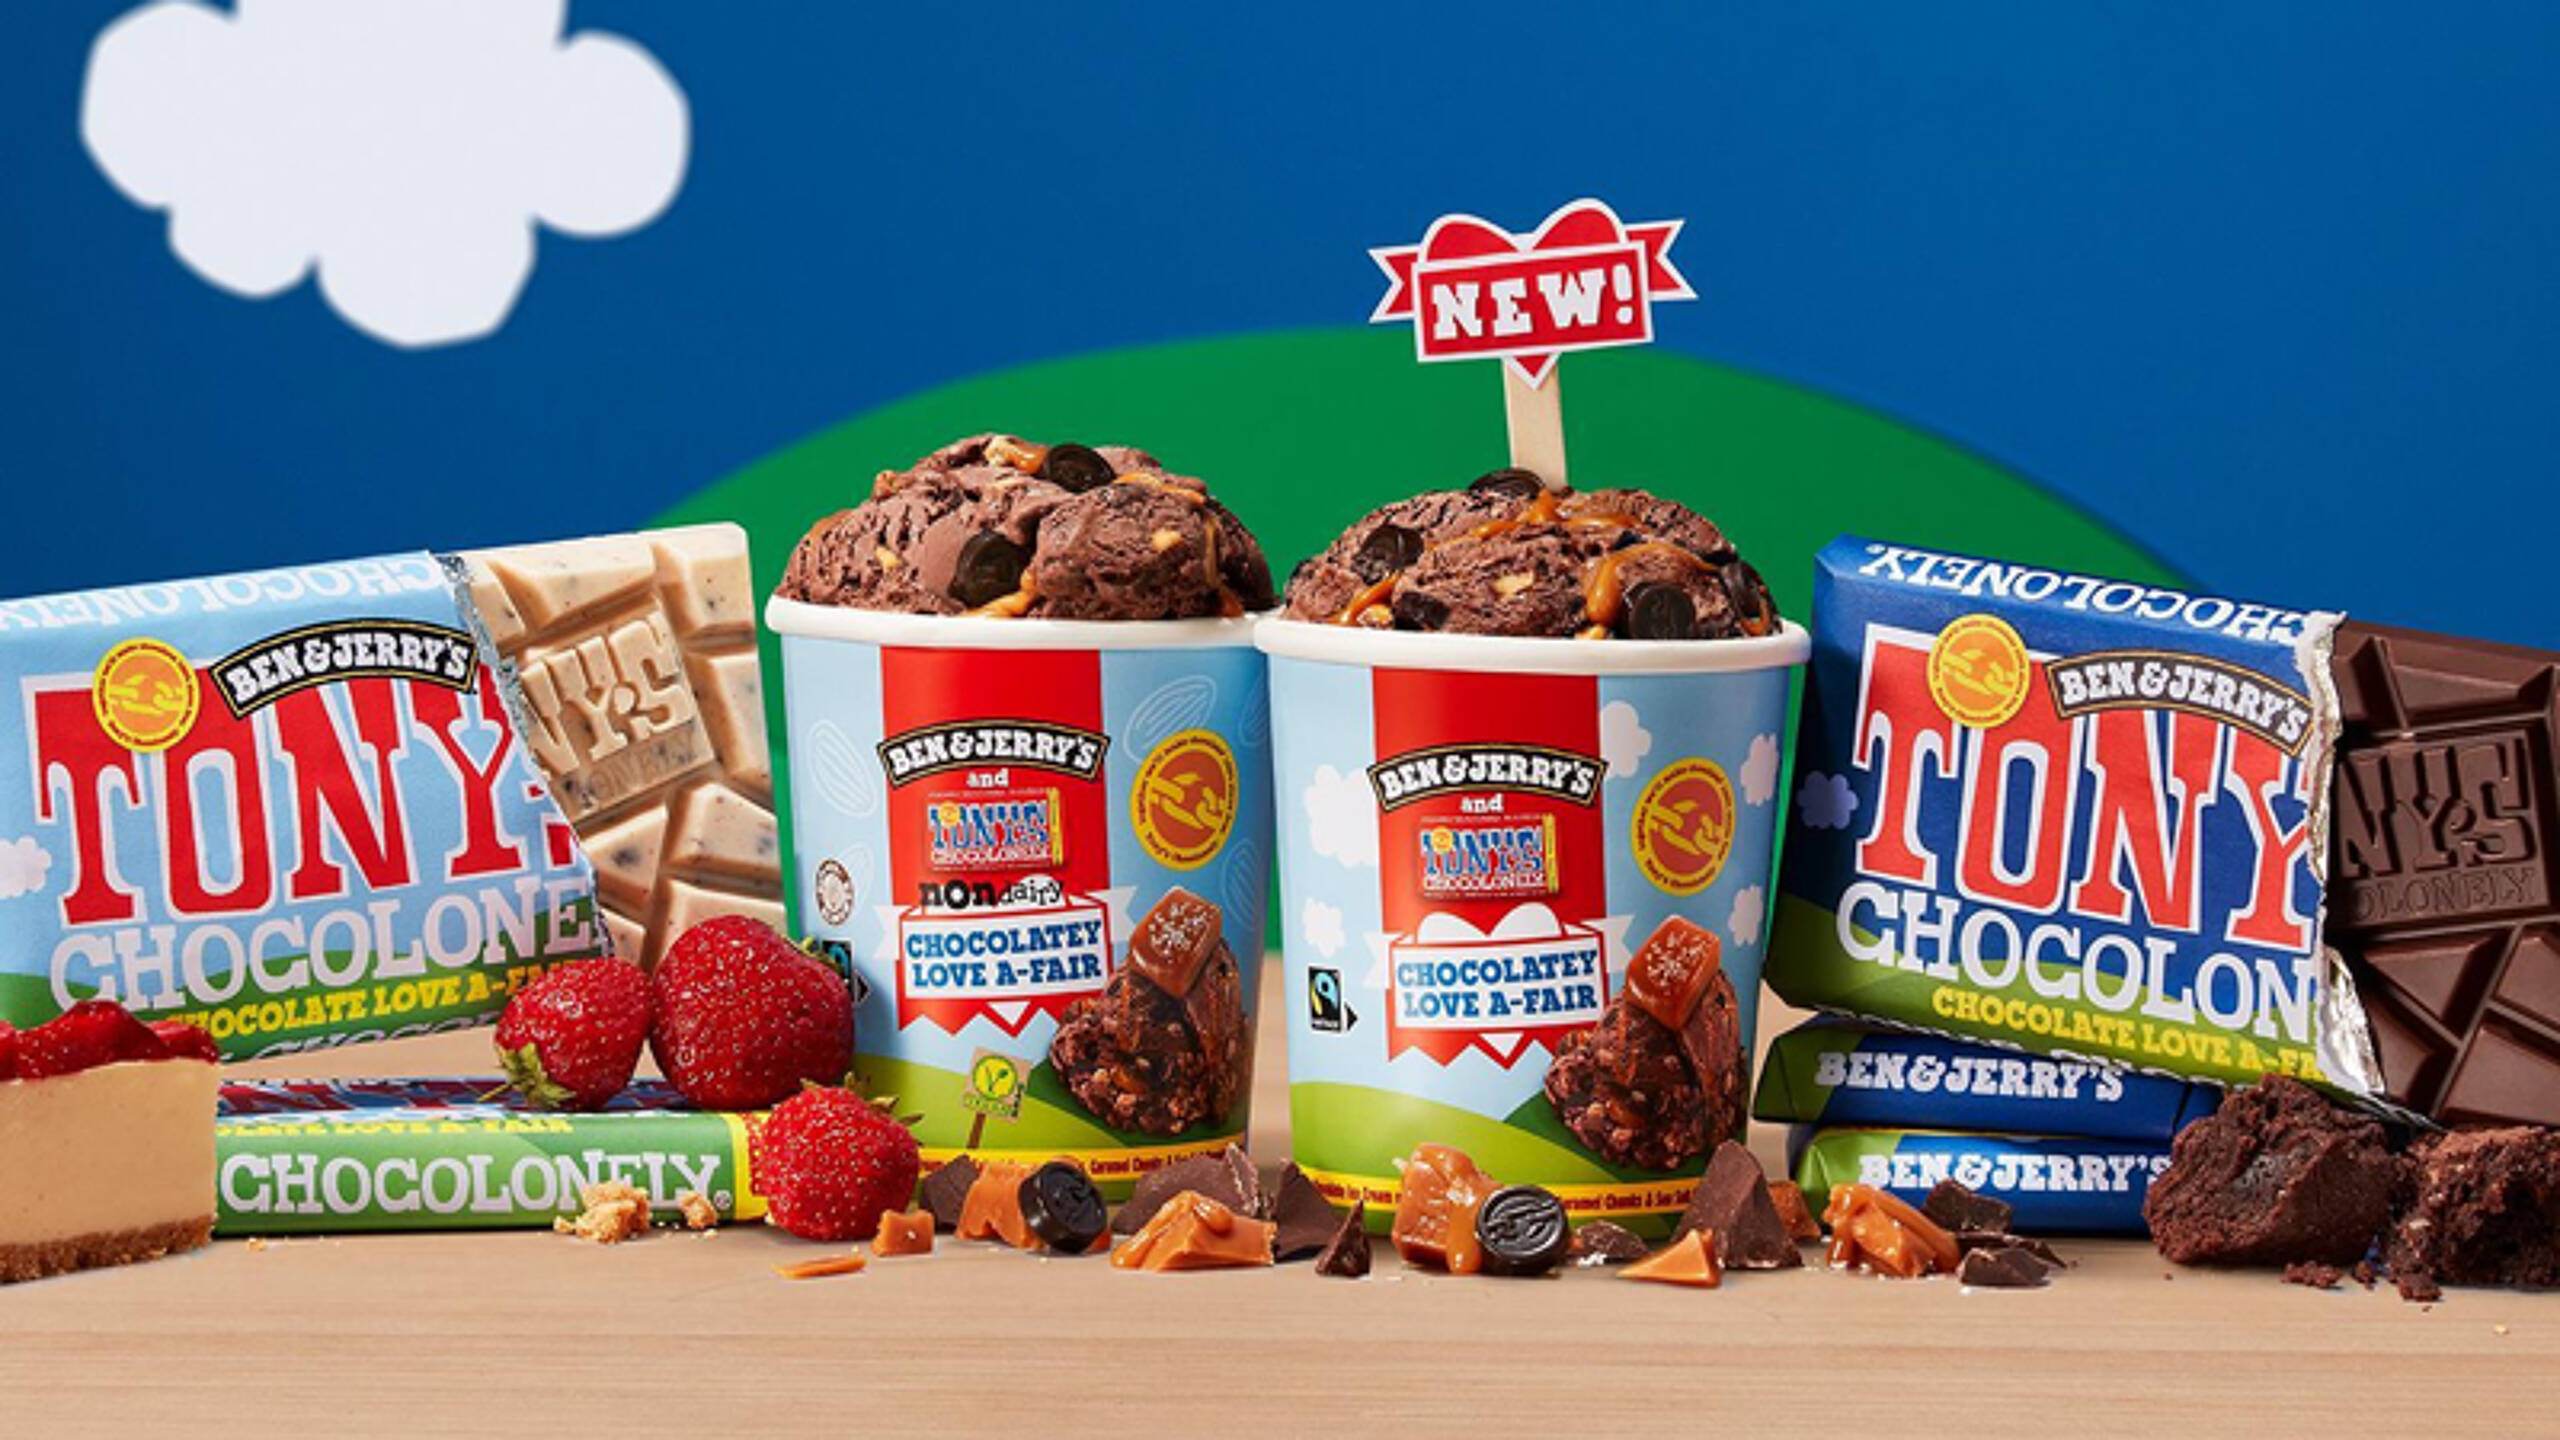 Ben & Jerry’s to crack down on human rights abuses in cocoa supply chain through tie-up with Tony’s Chocoloney